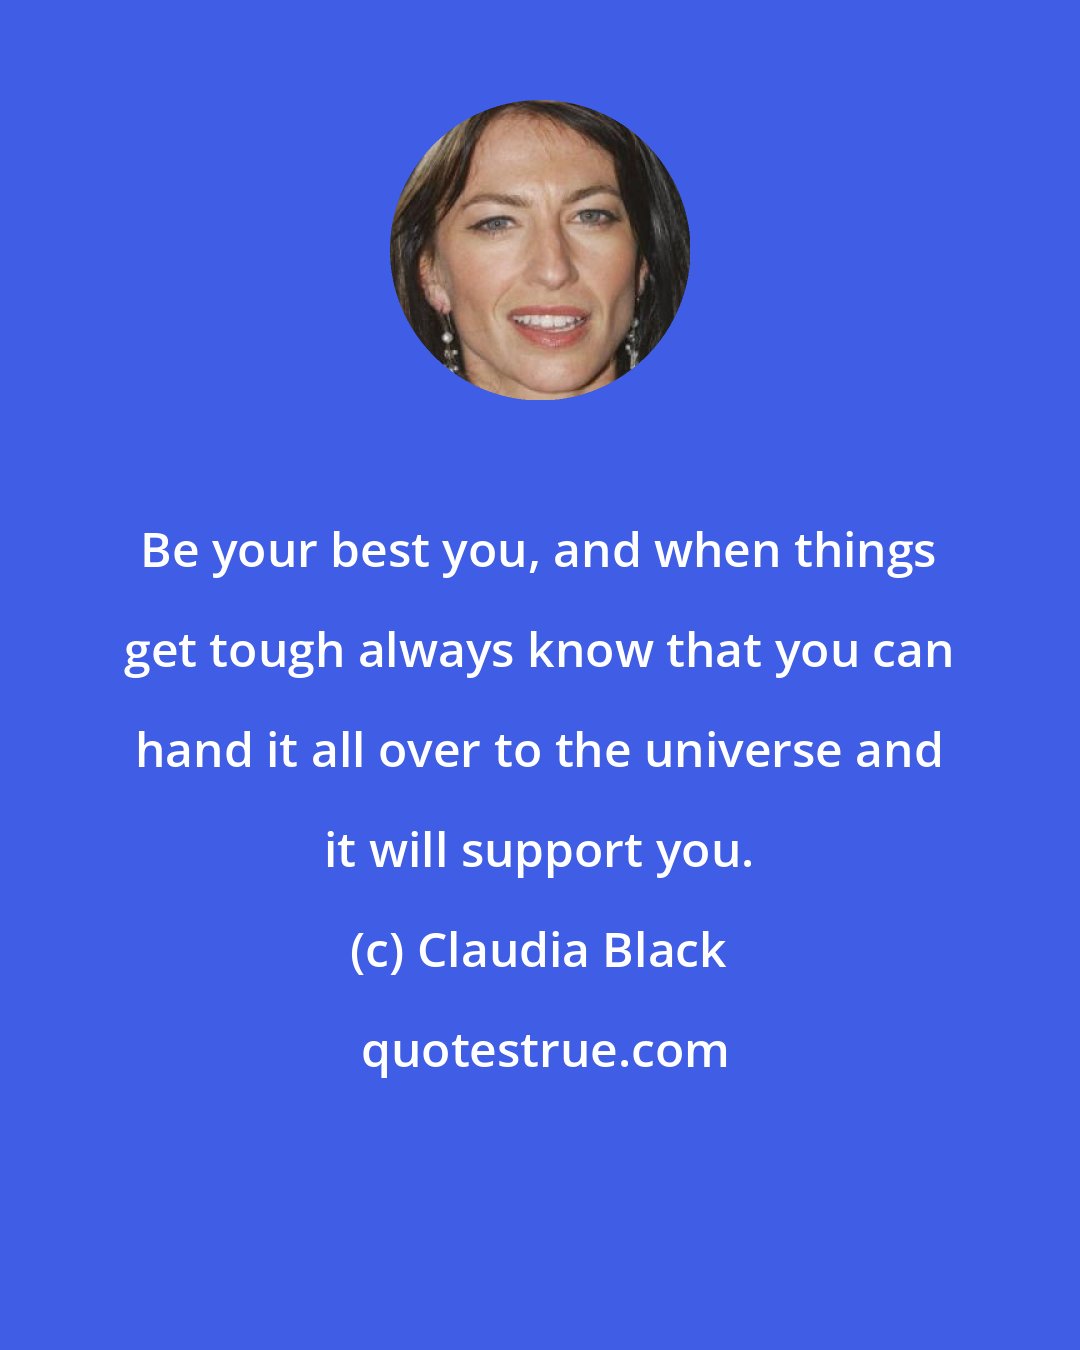 Claudia Black: Be your best you, and when things get tough always know that you can hand it all over to the universe and it will support you.